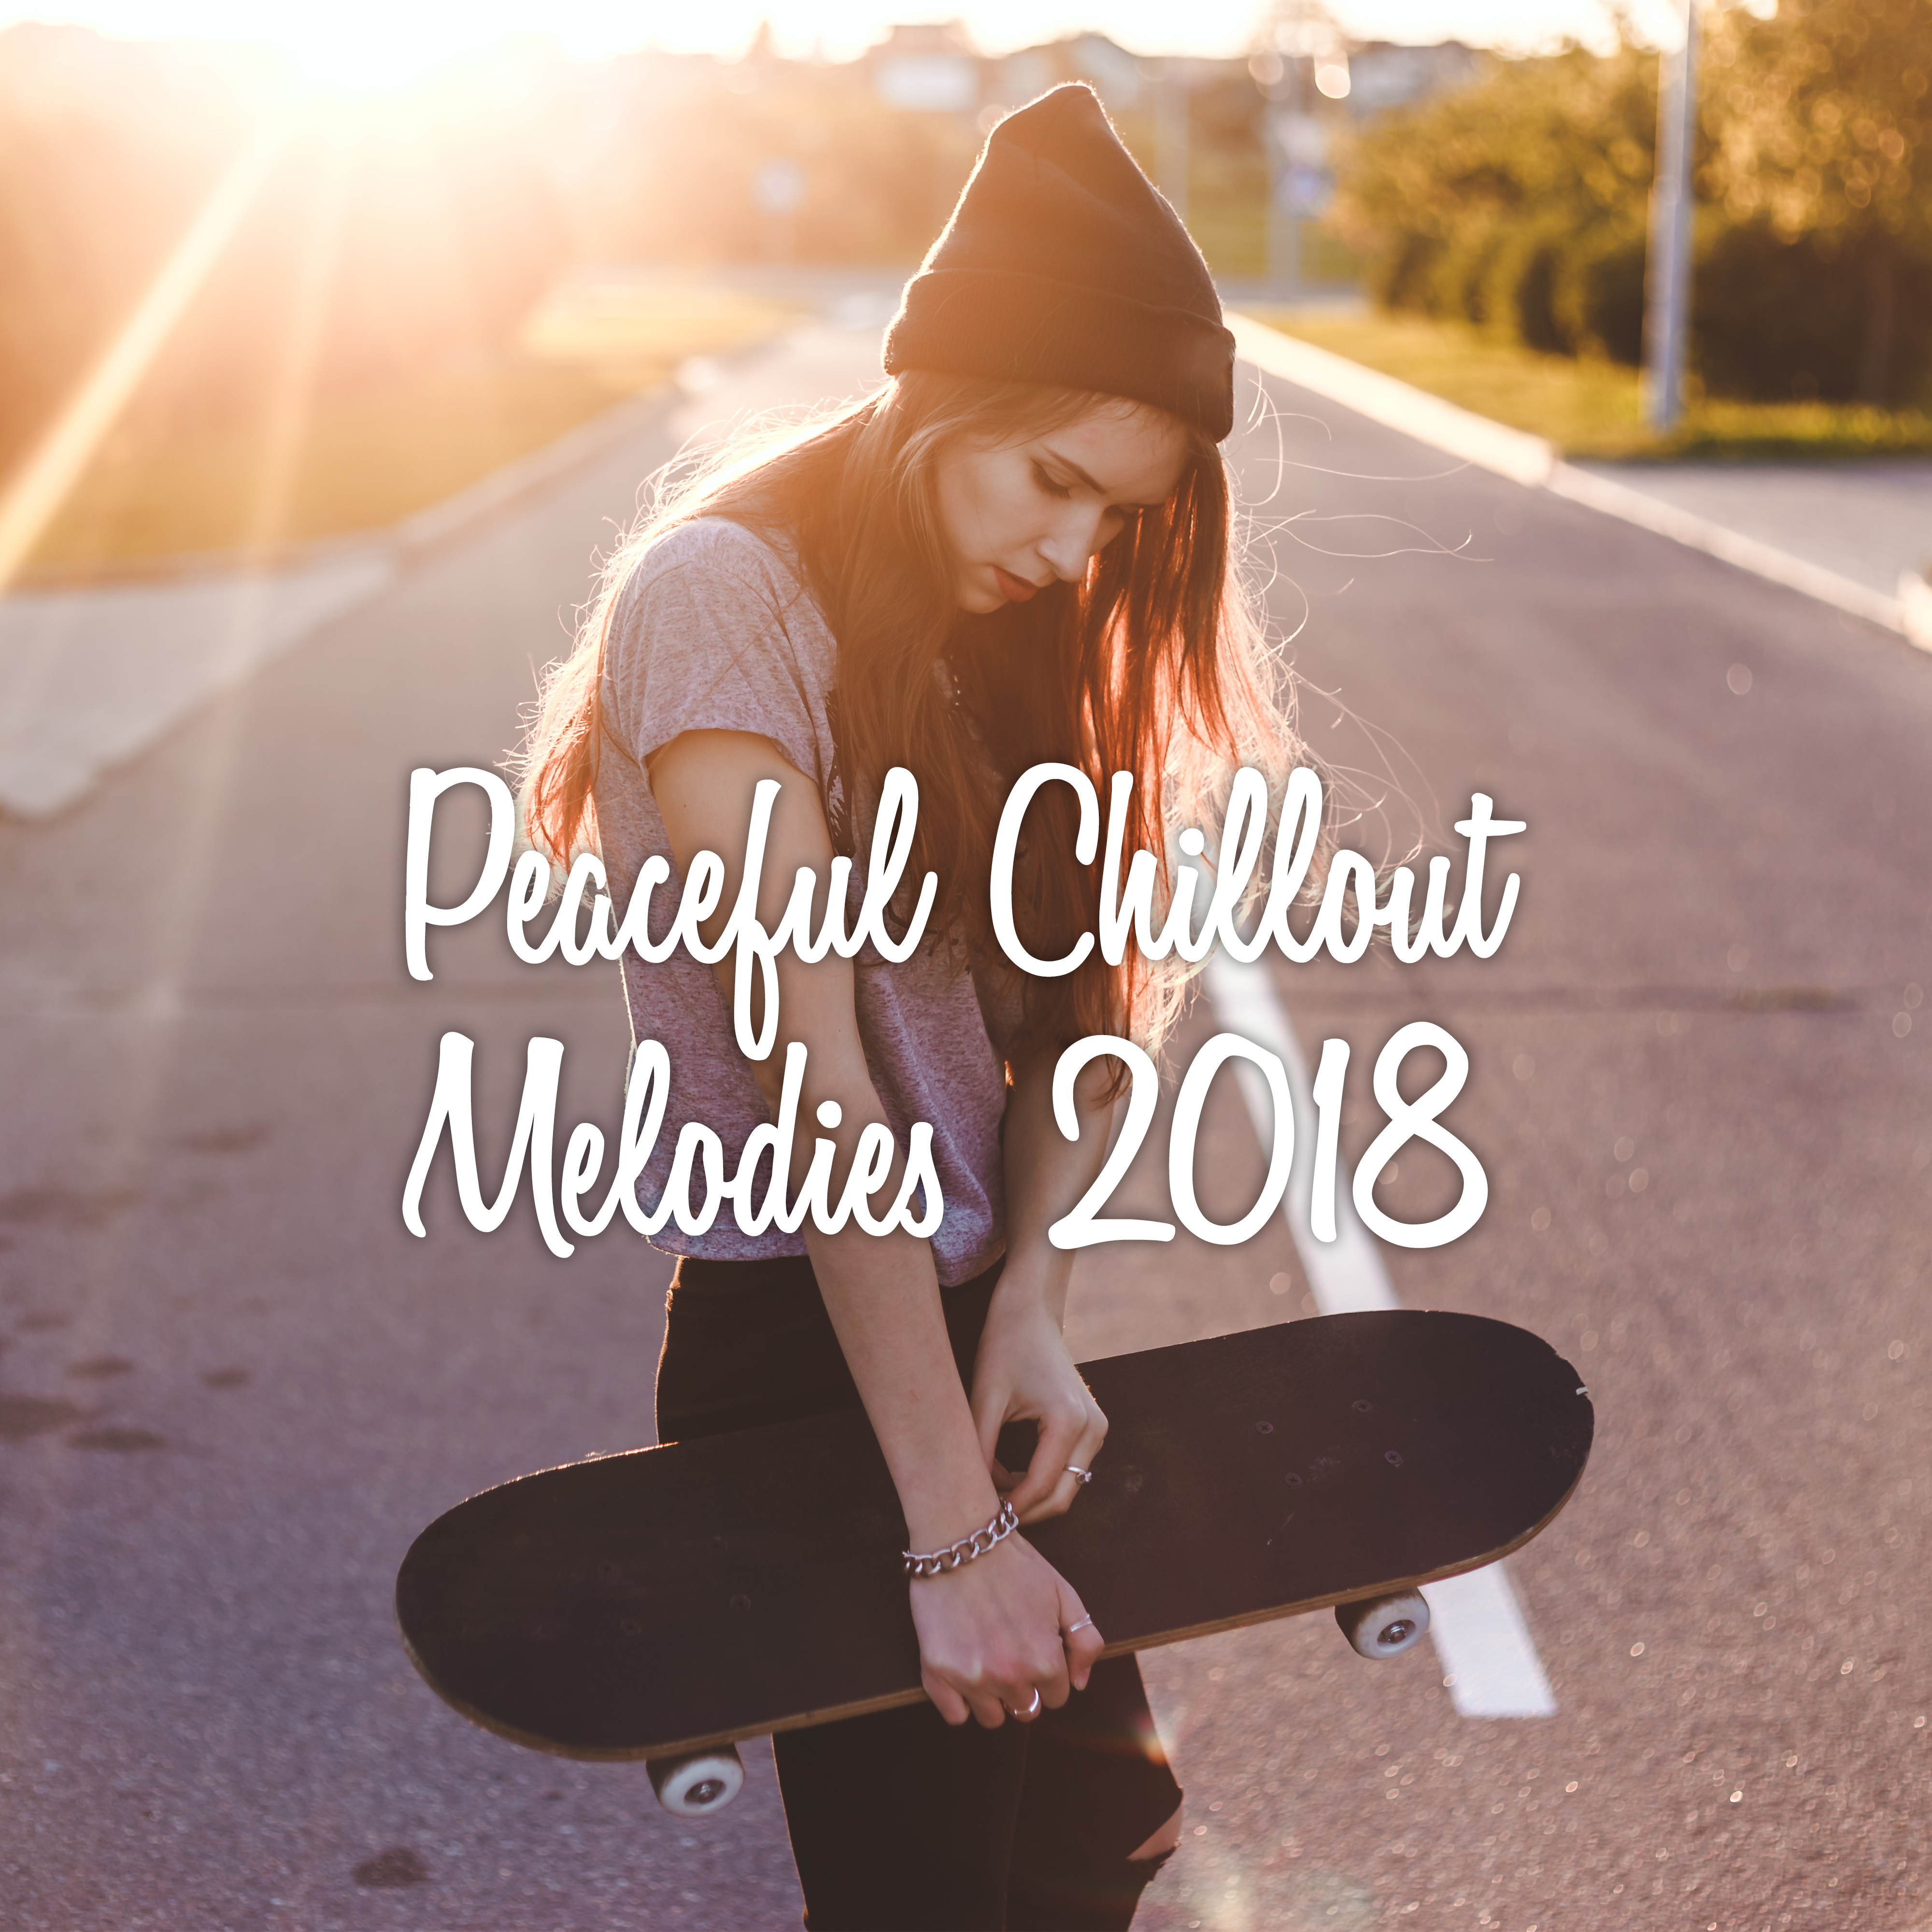 Peaceful Chillout Melodies 2018